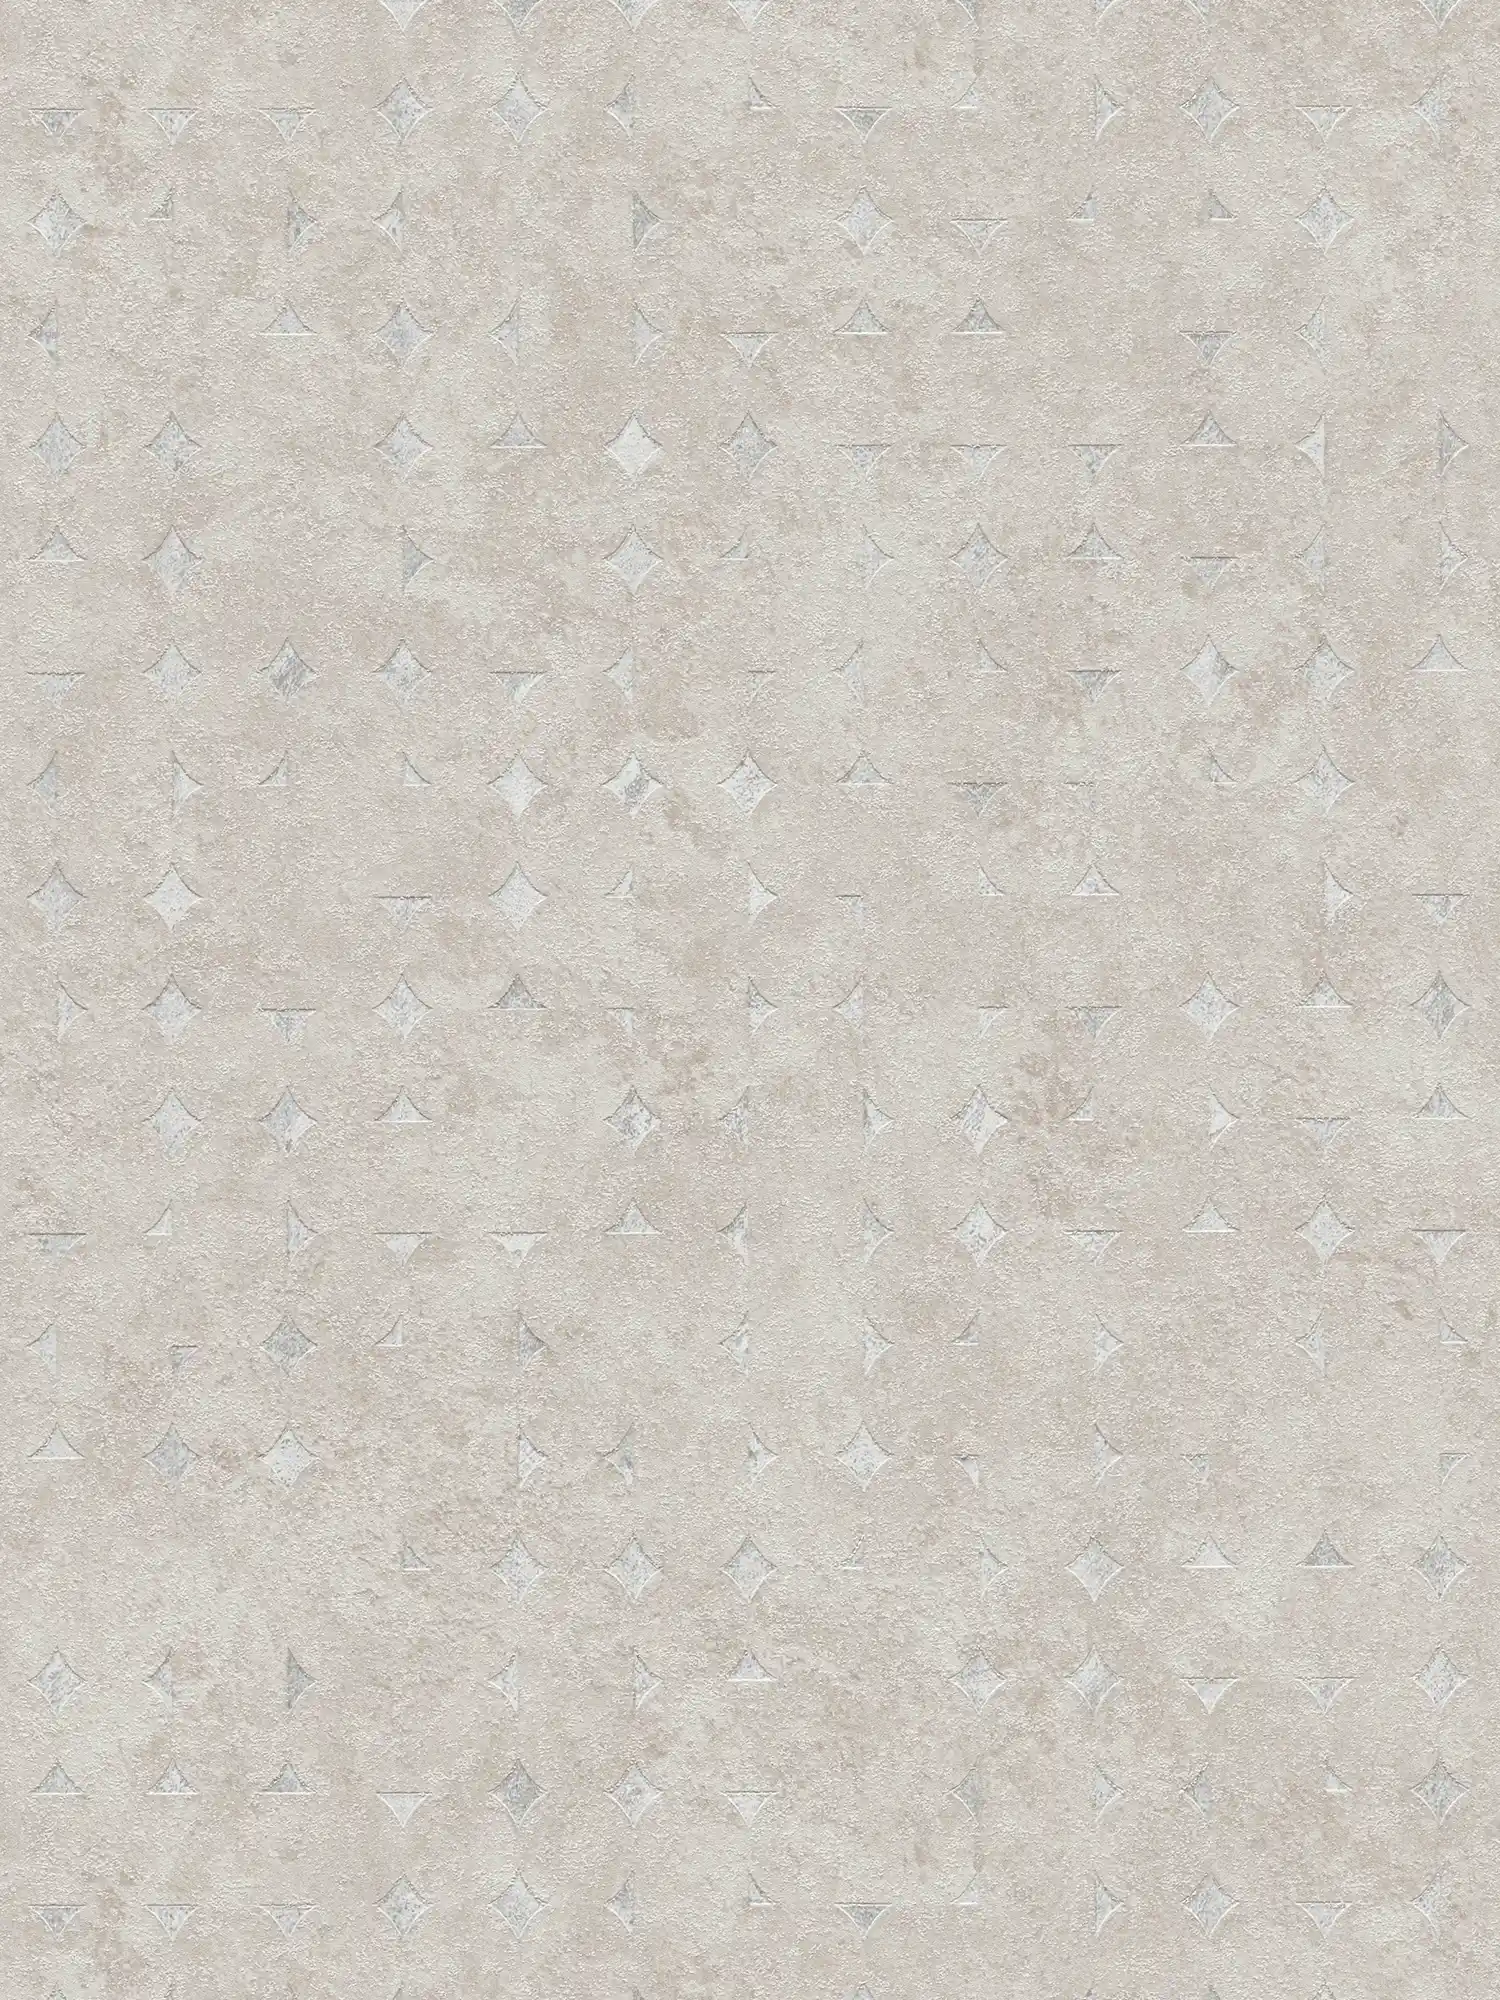 Non-woven wallpaper with geometric shapes, slightly glossy - beige, silver
